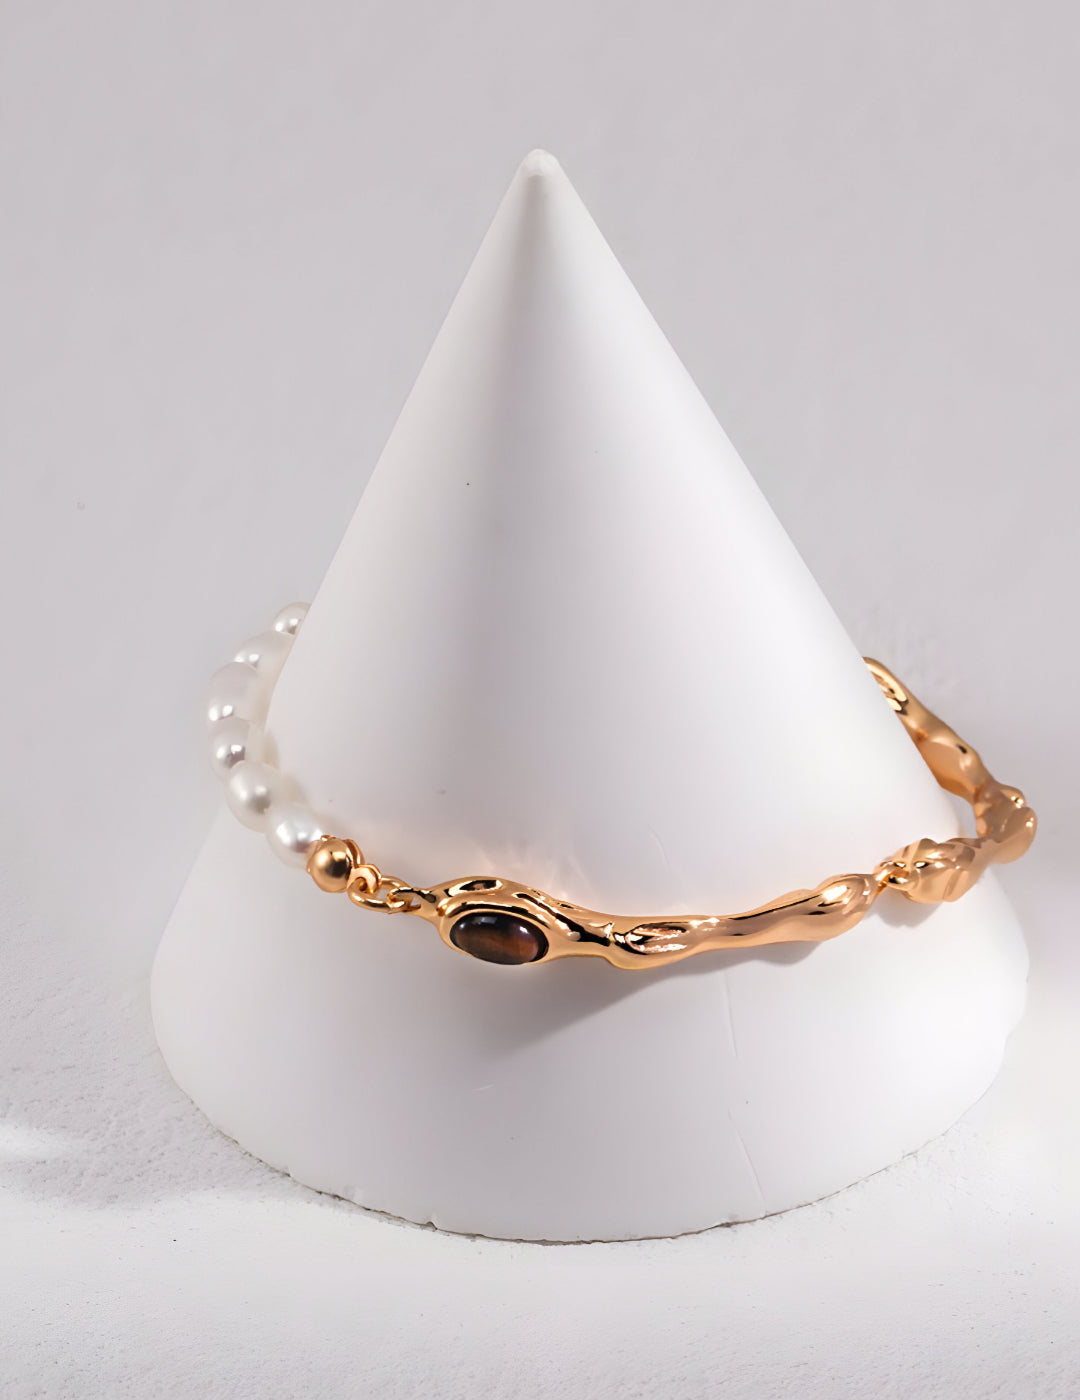  Luxe Bracelet  - S925 sterling pure silver -18K Gold Vermeil  -   Pearl Luminance - adorned with majestic Tiger's Eye gemstones that capture every gaze - Elevate your style with a touch of exotic allure. Embrace beauty and confidence, effortlessly